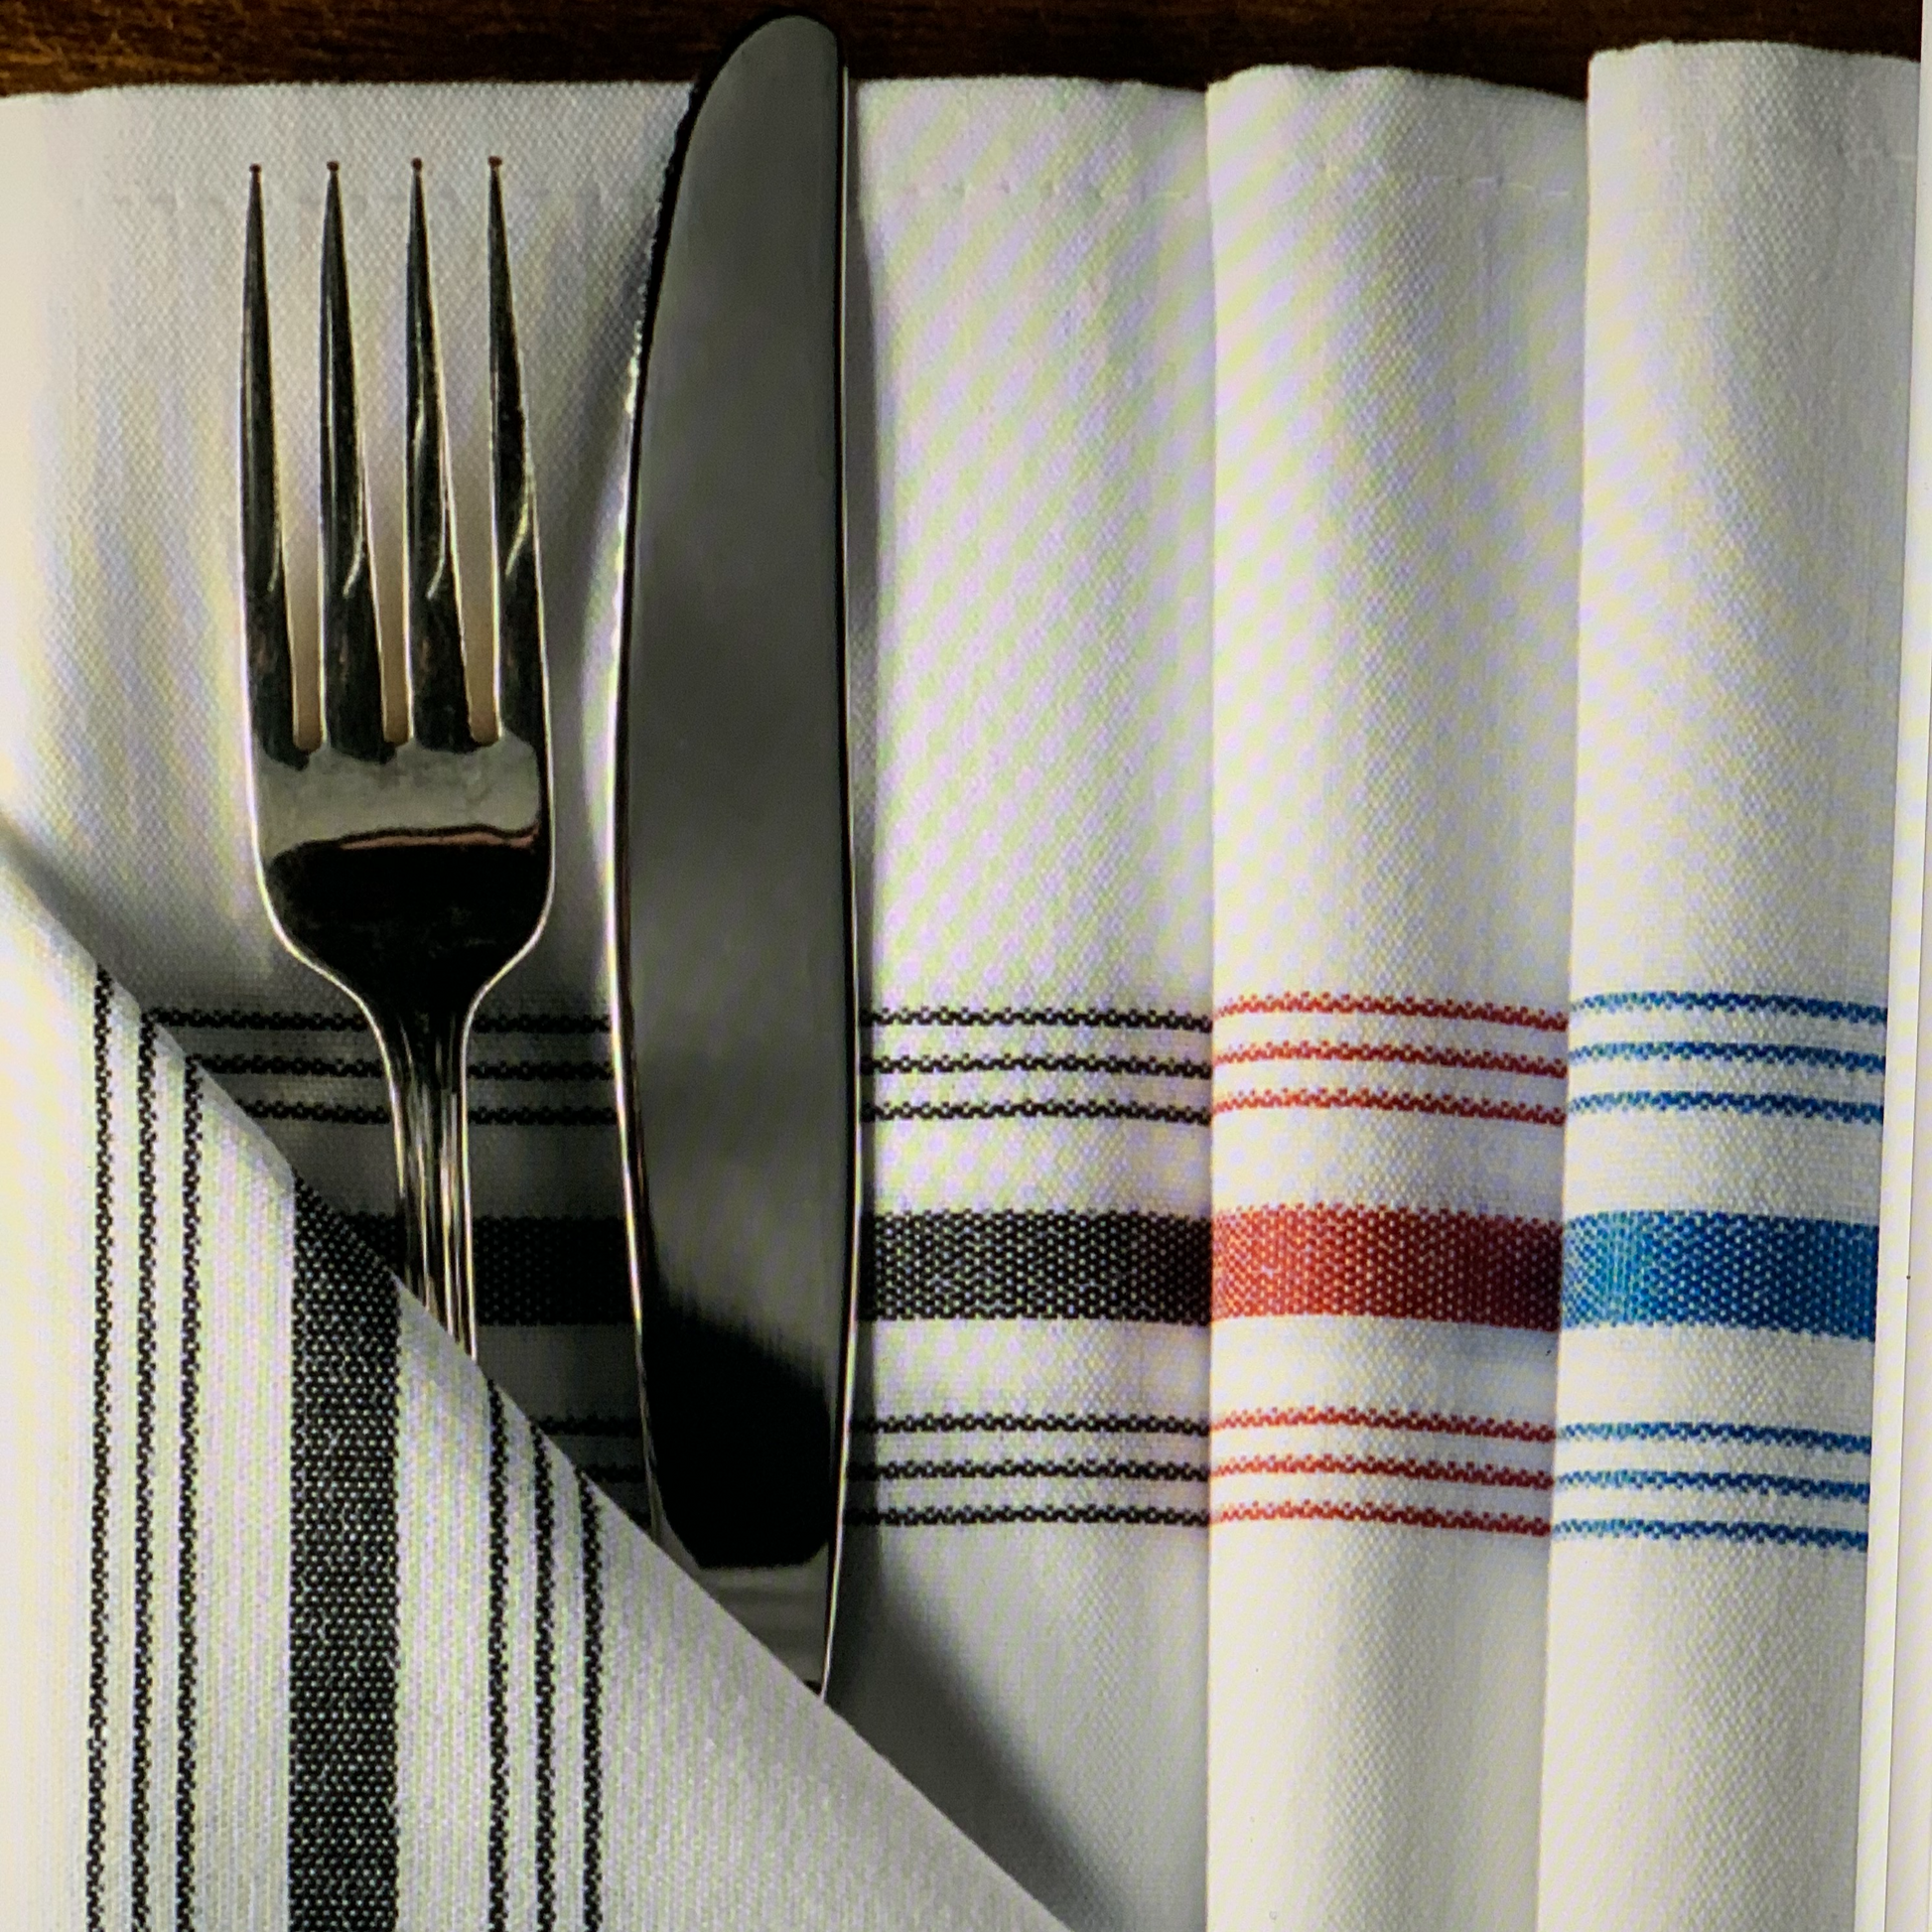 Bistro Striped Napkins in black, red, blue, folded with a fork and knife inserted in the fold.